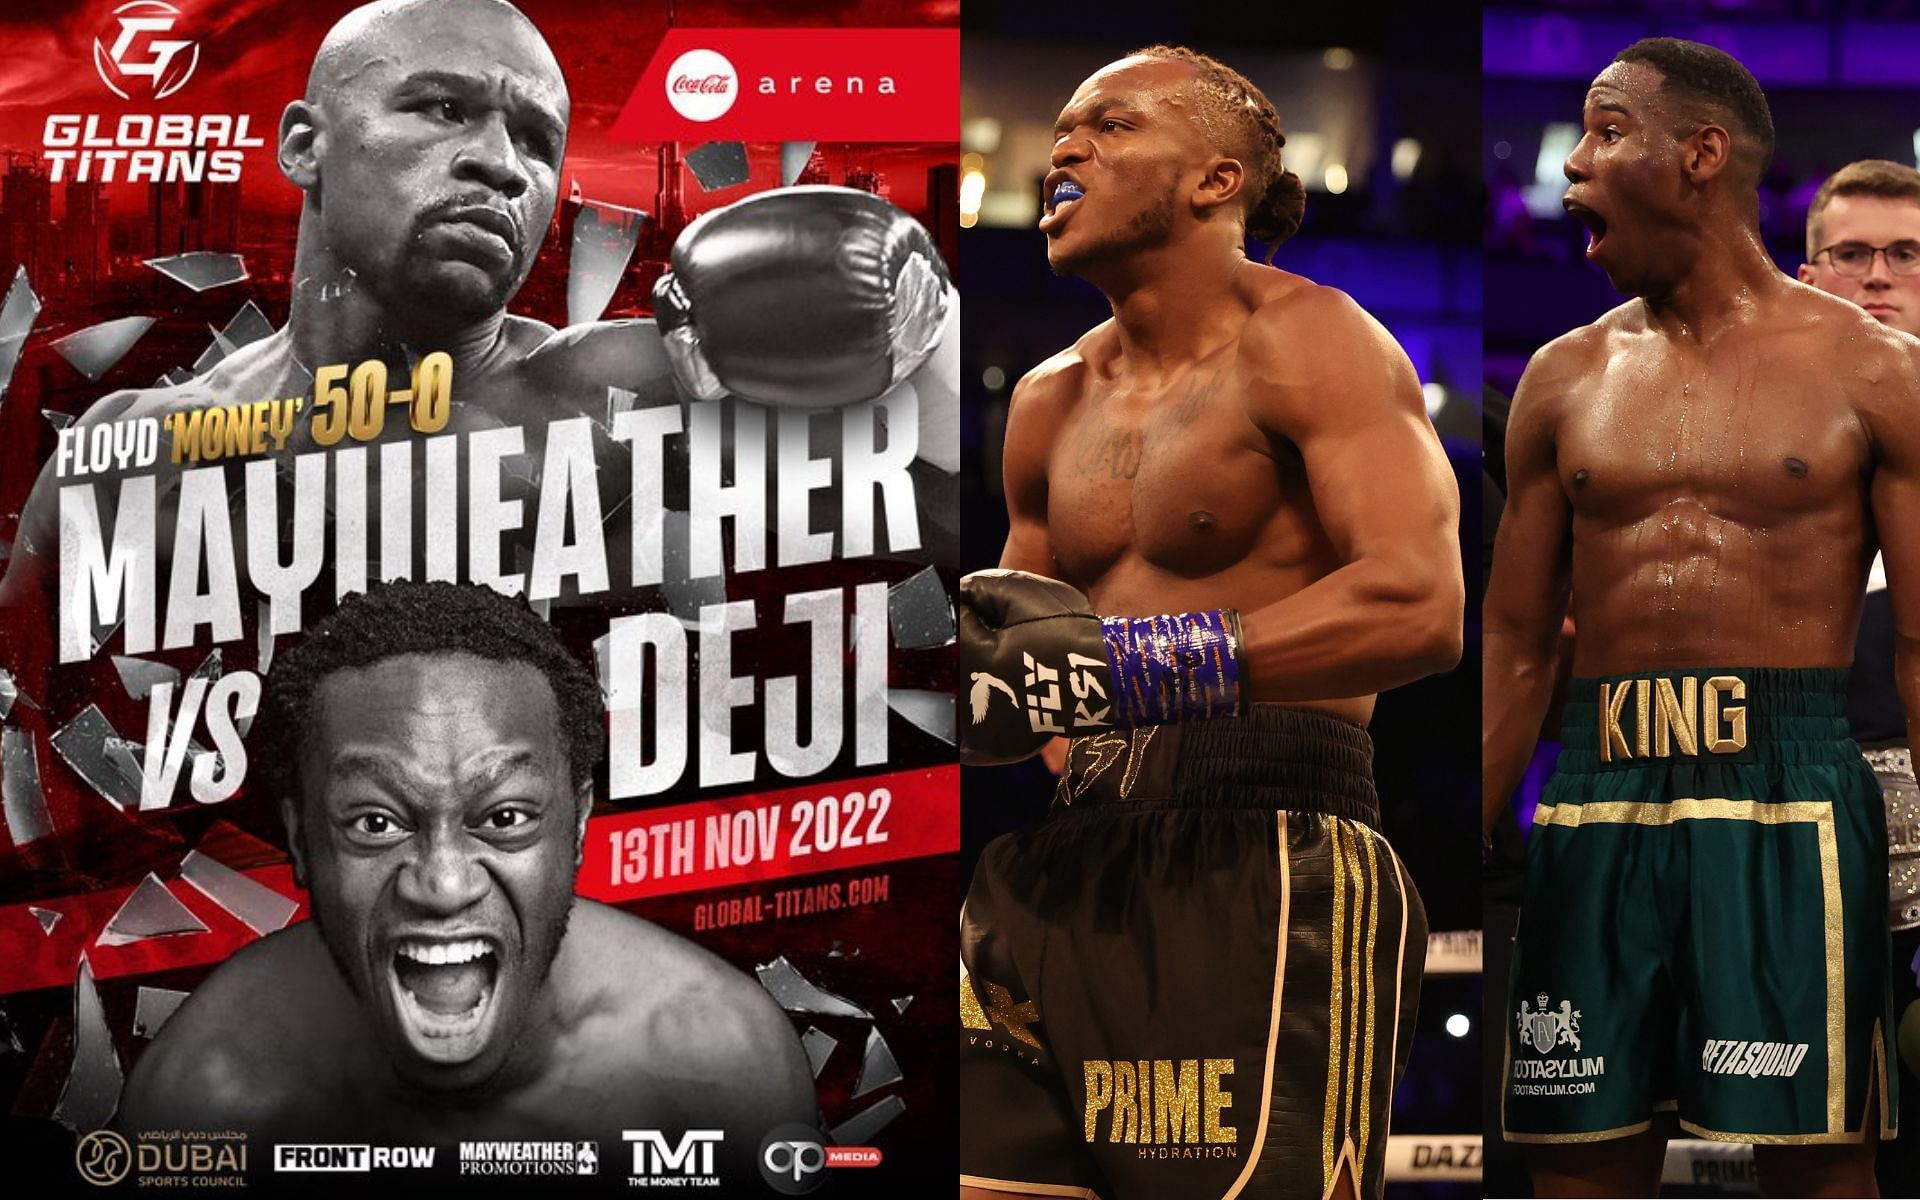 Floyd Mayweather vs. Deji fight announcement poster (left) and KSI next to King Kenny (right) (Image credits Getty Images and @Deji on Twitter))